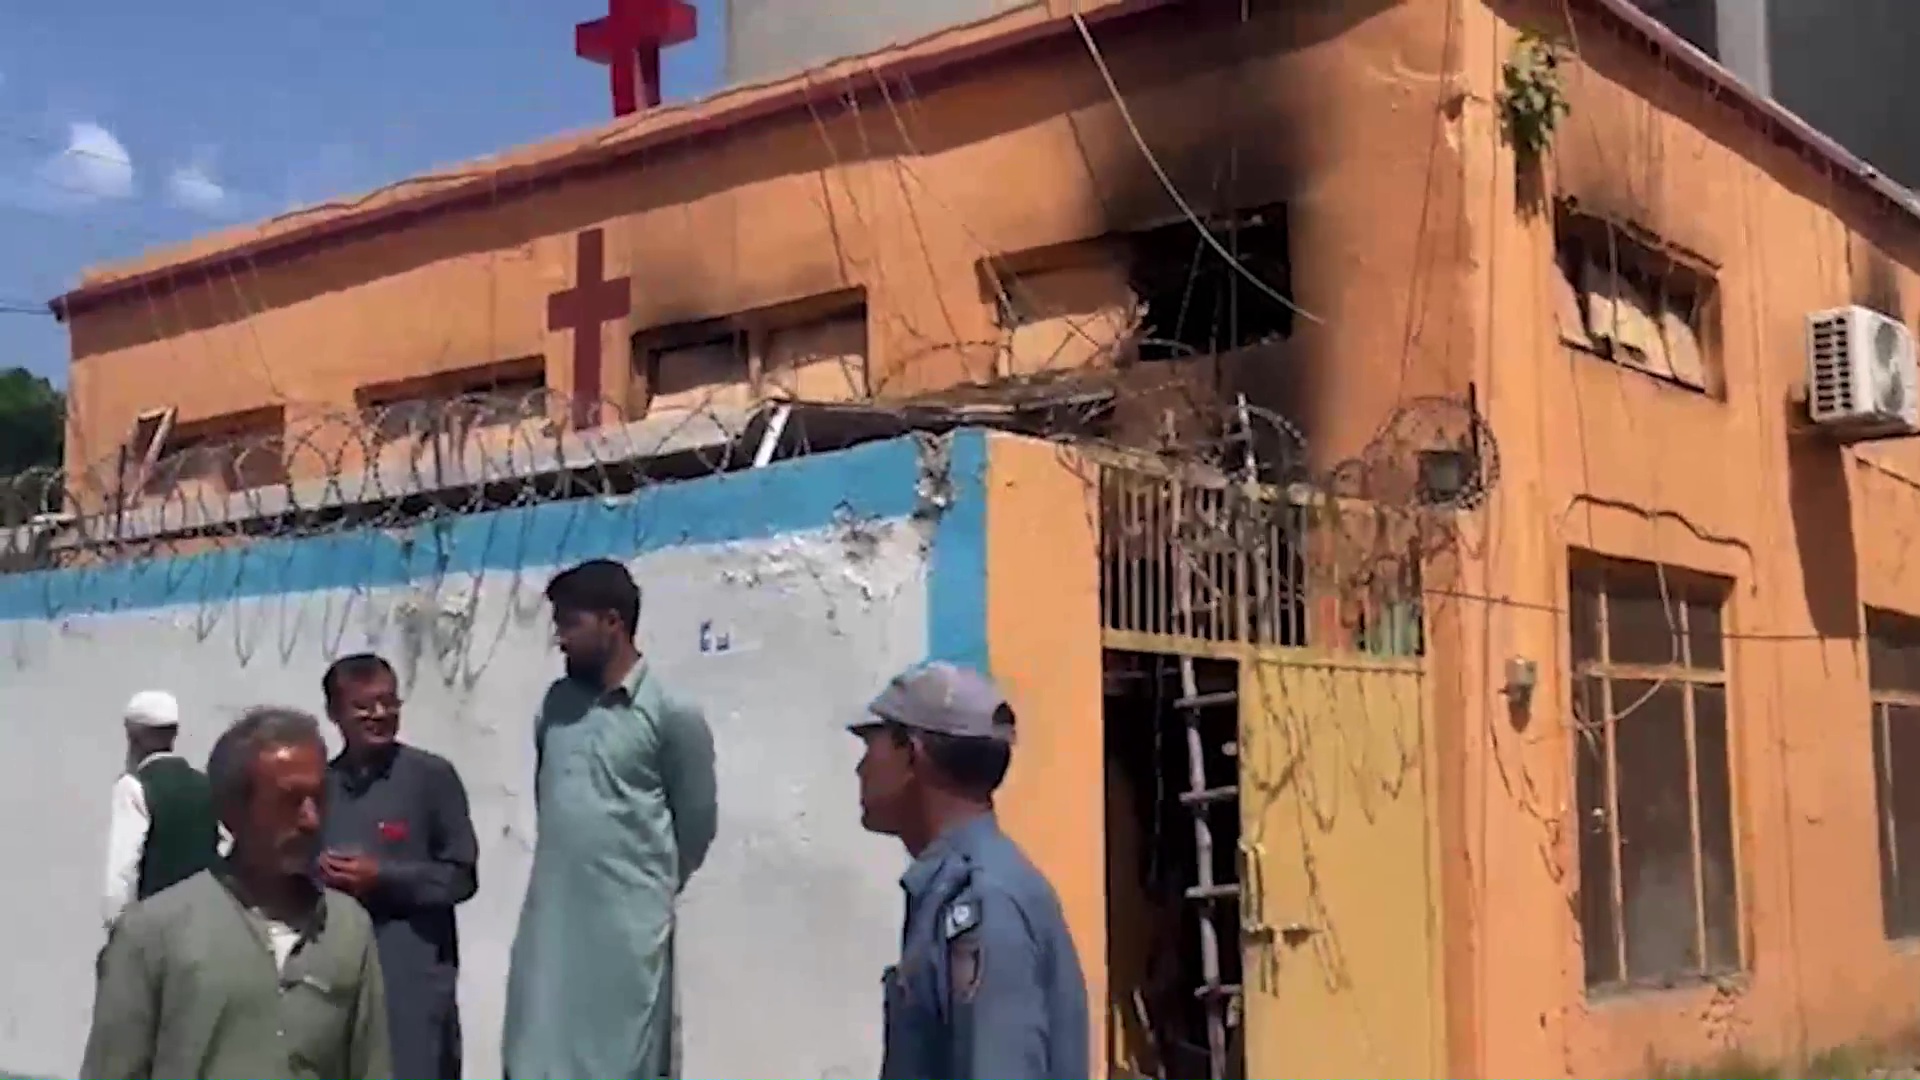 Last summer violent mob attacks on churches in the Punjab province in Pakistan hit the headlines. Sadly attacks like these are continuing.